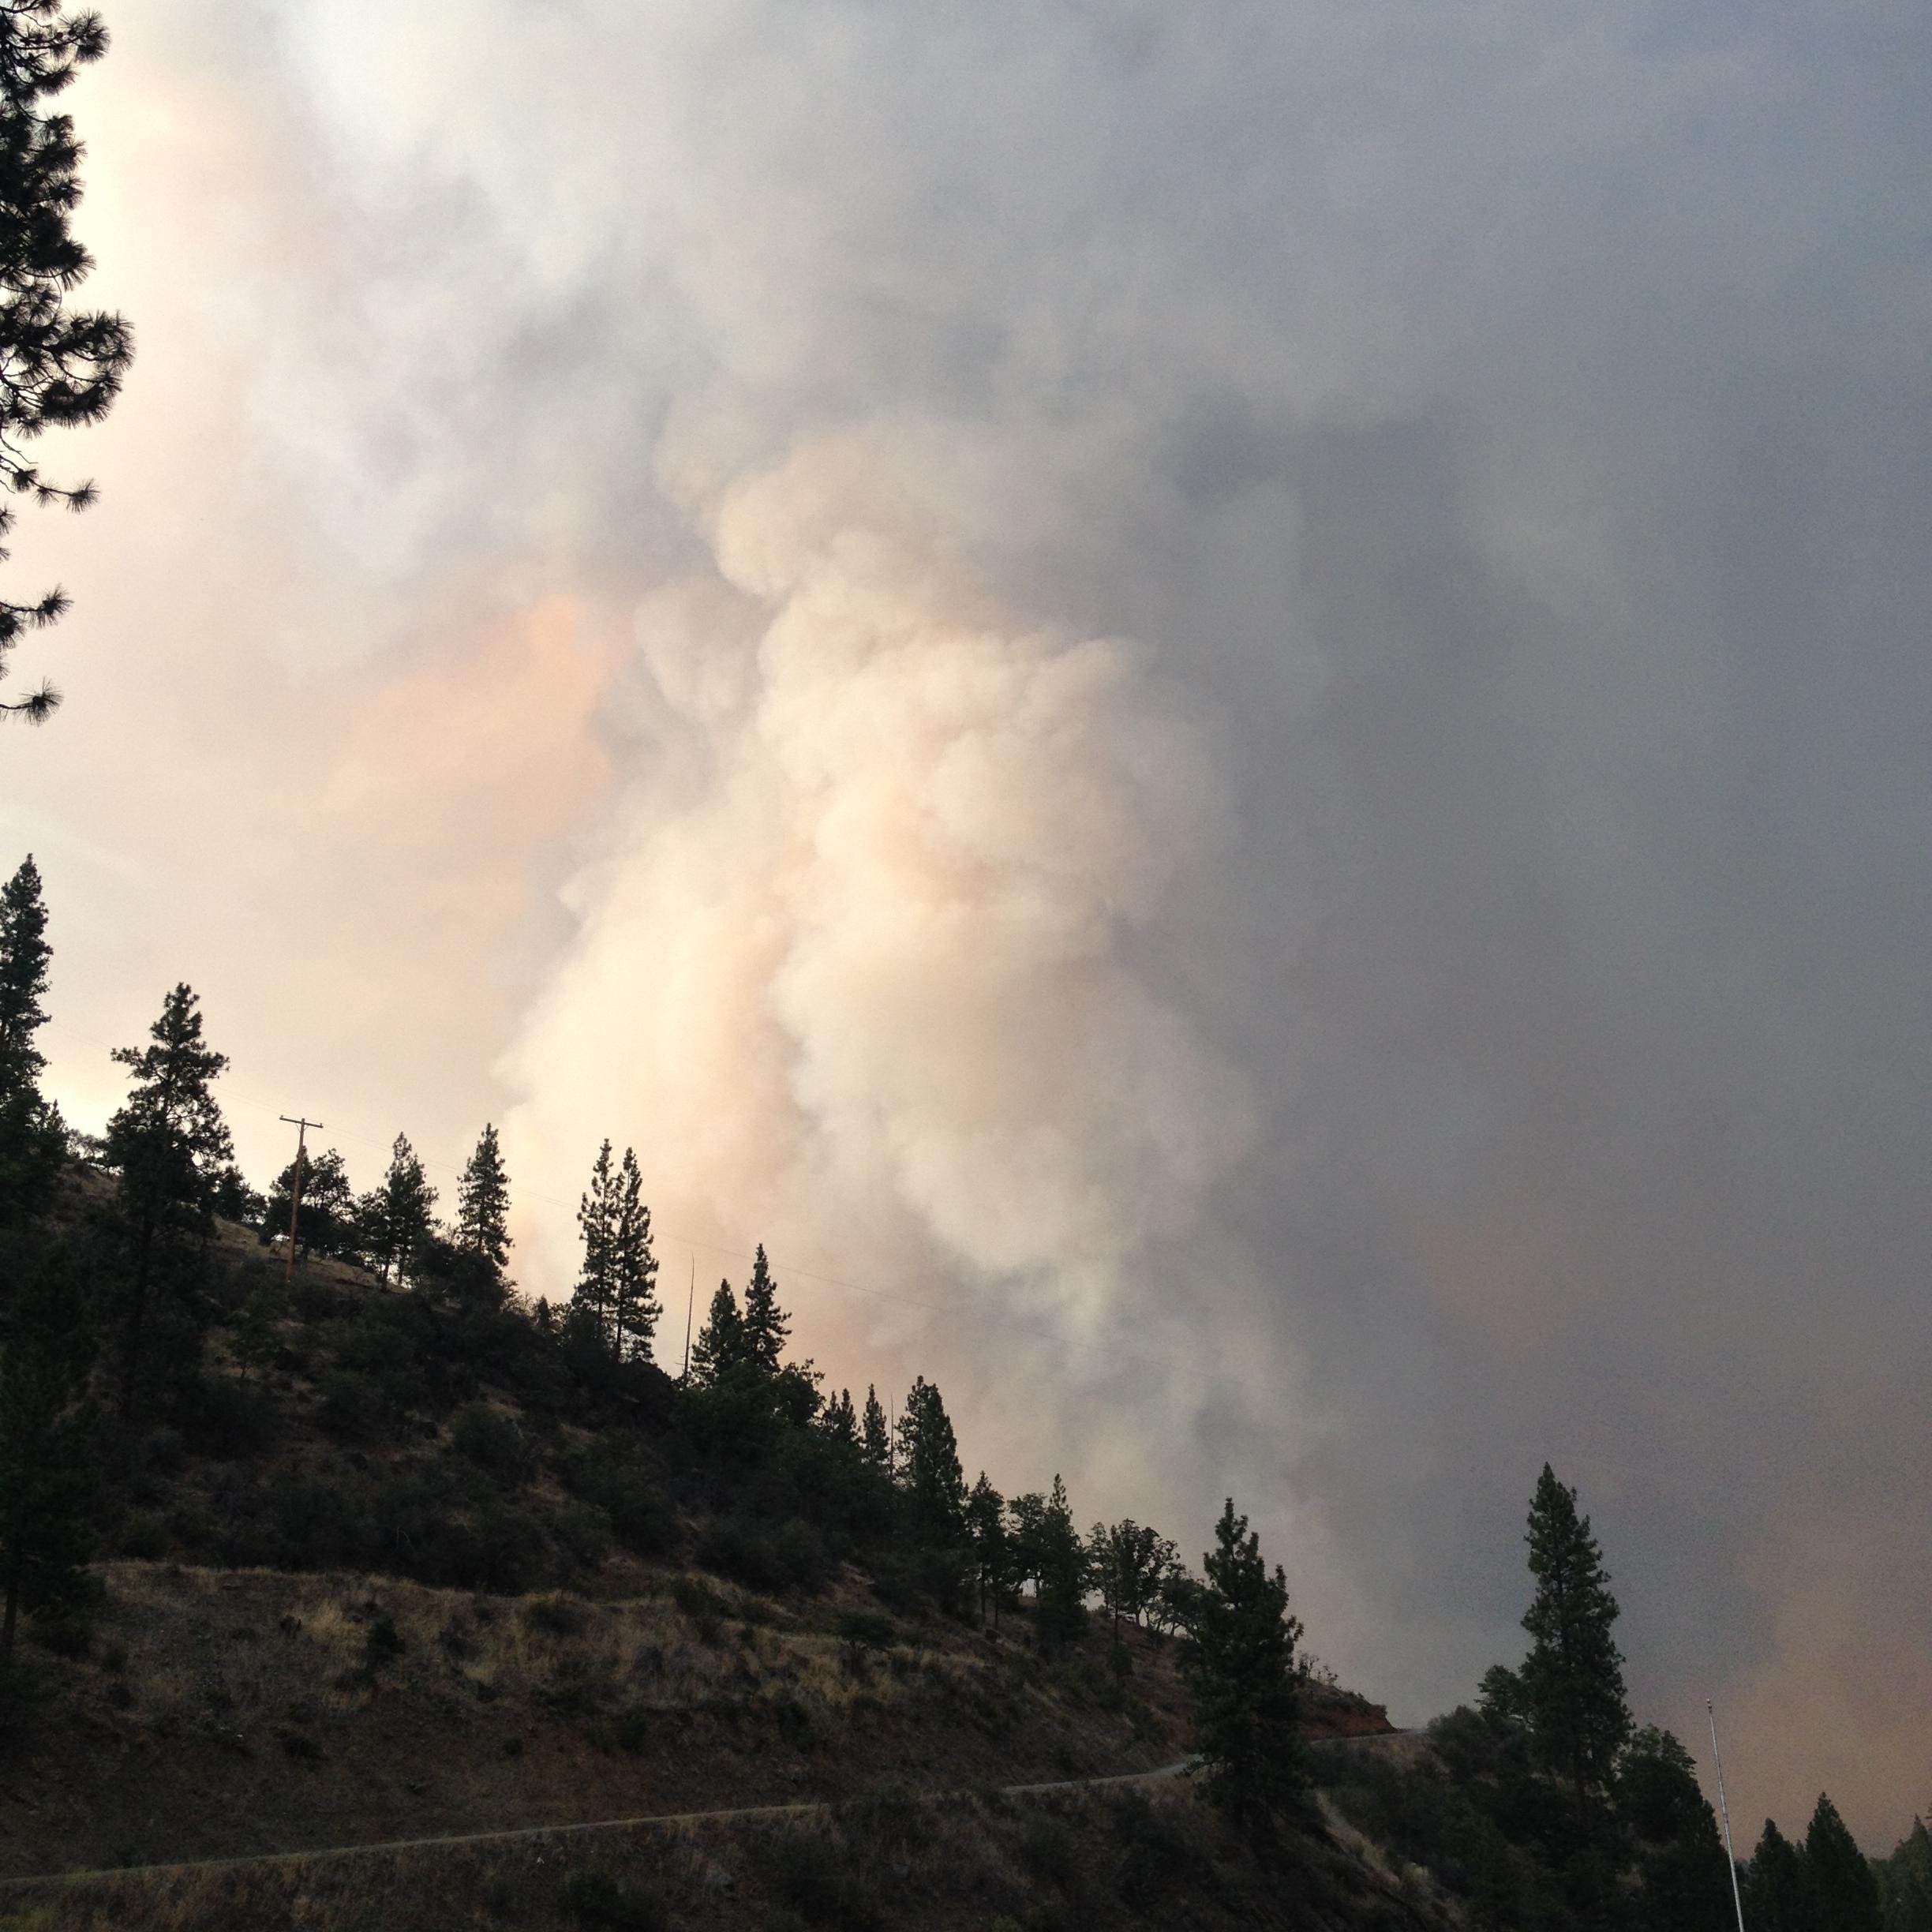 The lightning-caused Beaver Fire is located off of the Beaver Creek Road, north of Highway 96 near Klamath River, in Siskiyou County, California.